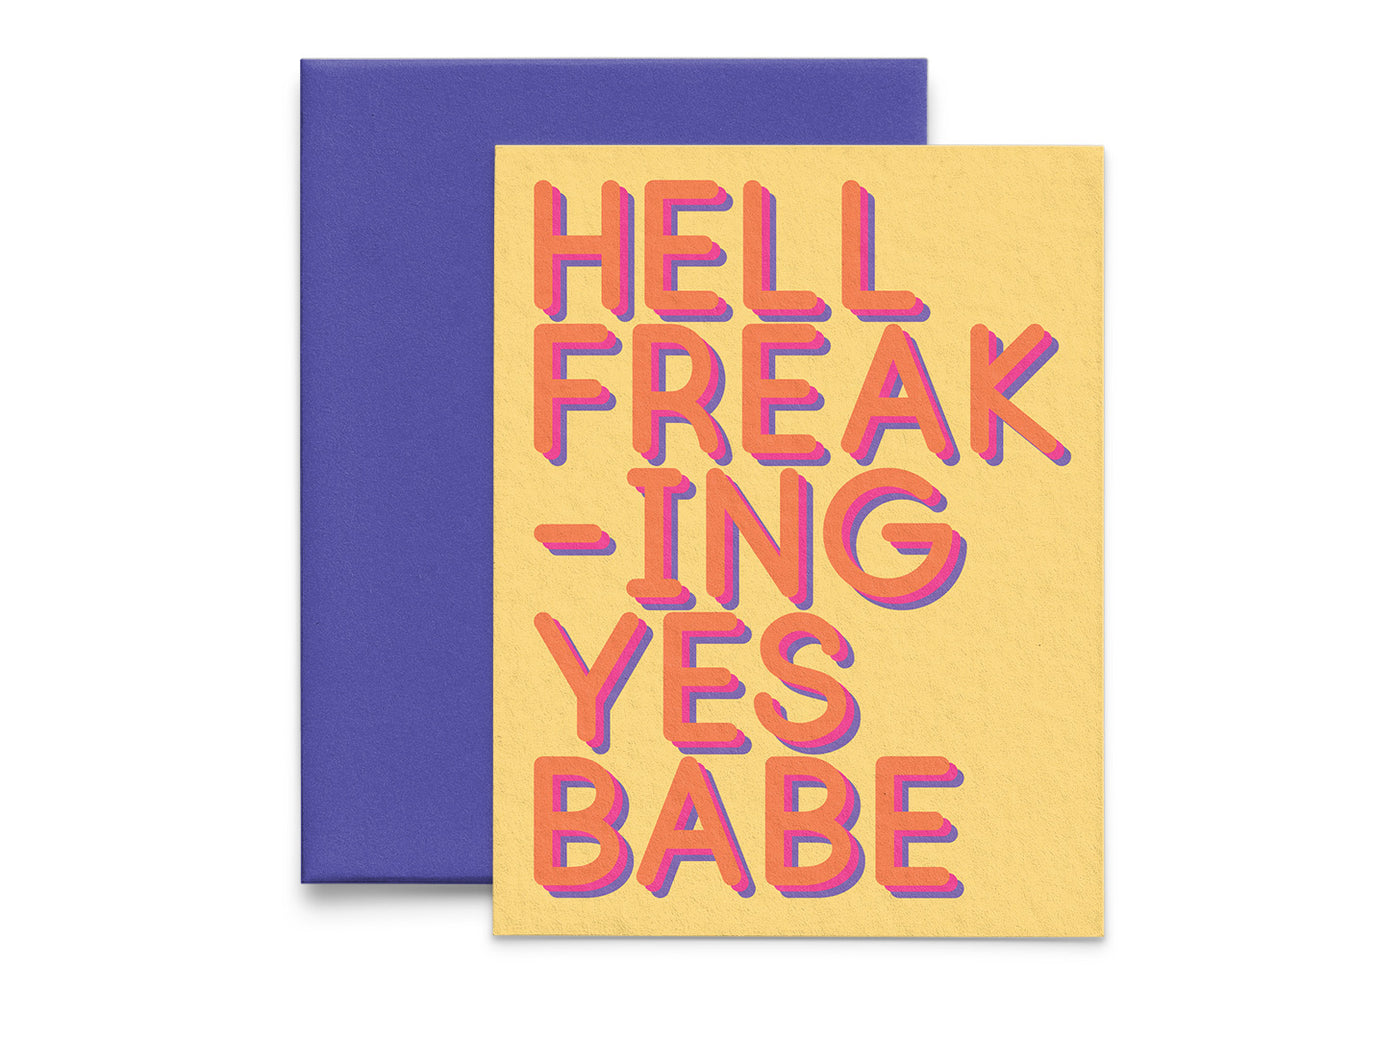 Hell Freaking Yes Babe Congratulations Greeting Card